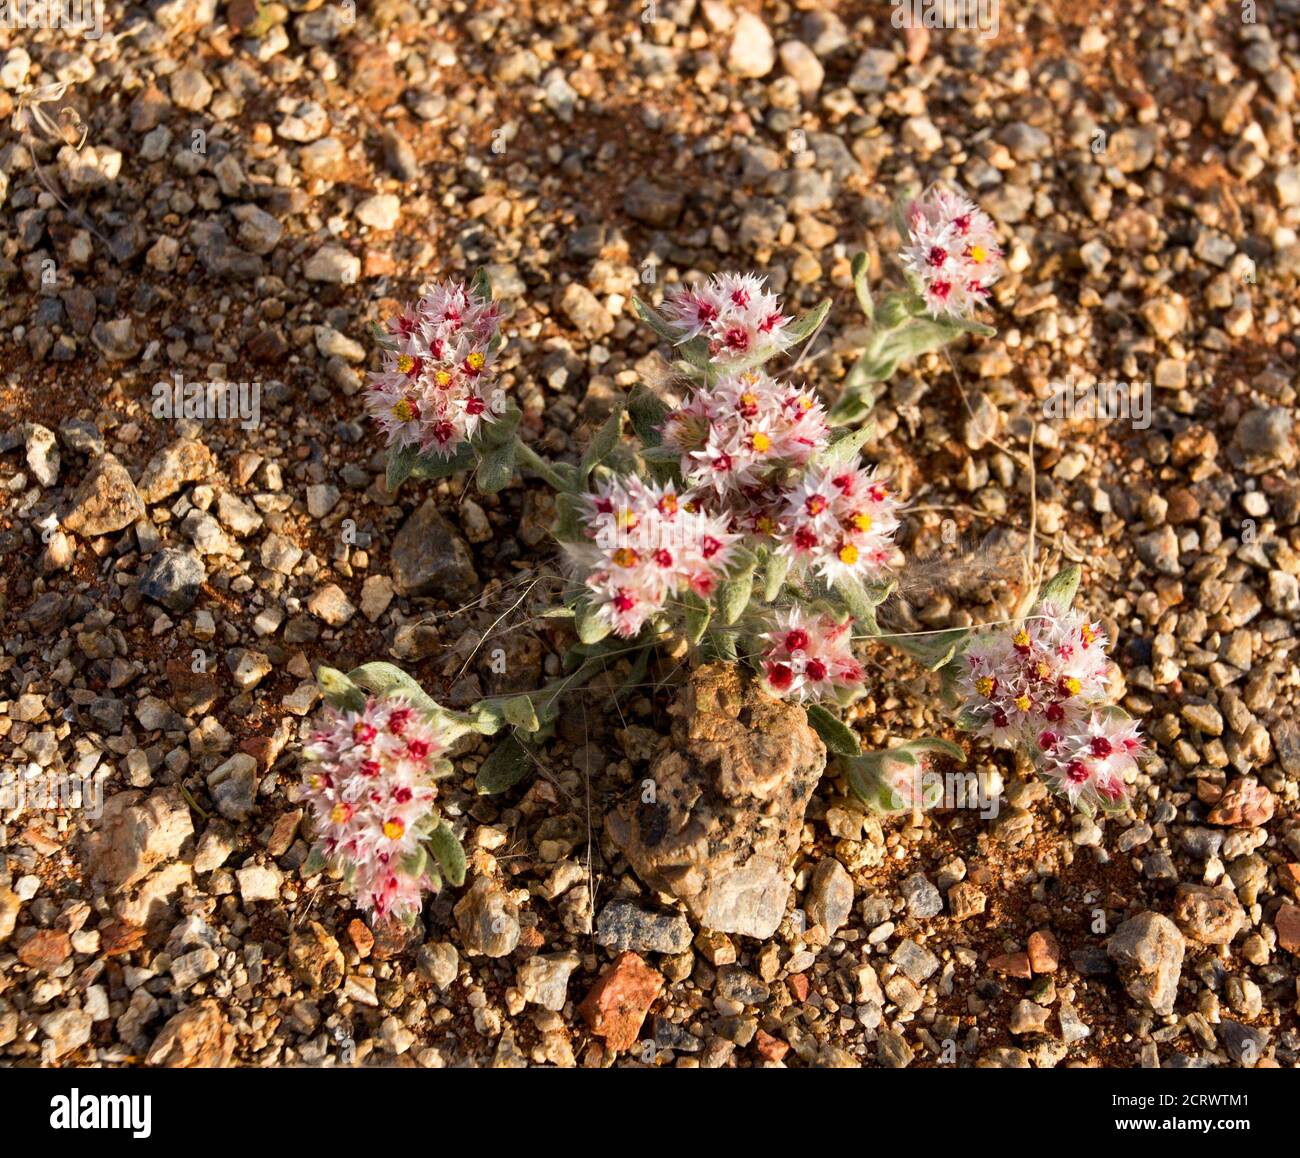 A small plant with flowers in Namibia desert Stock Photo